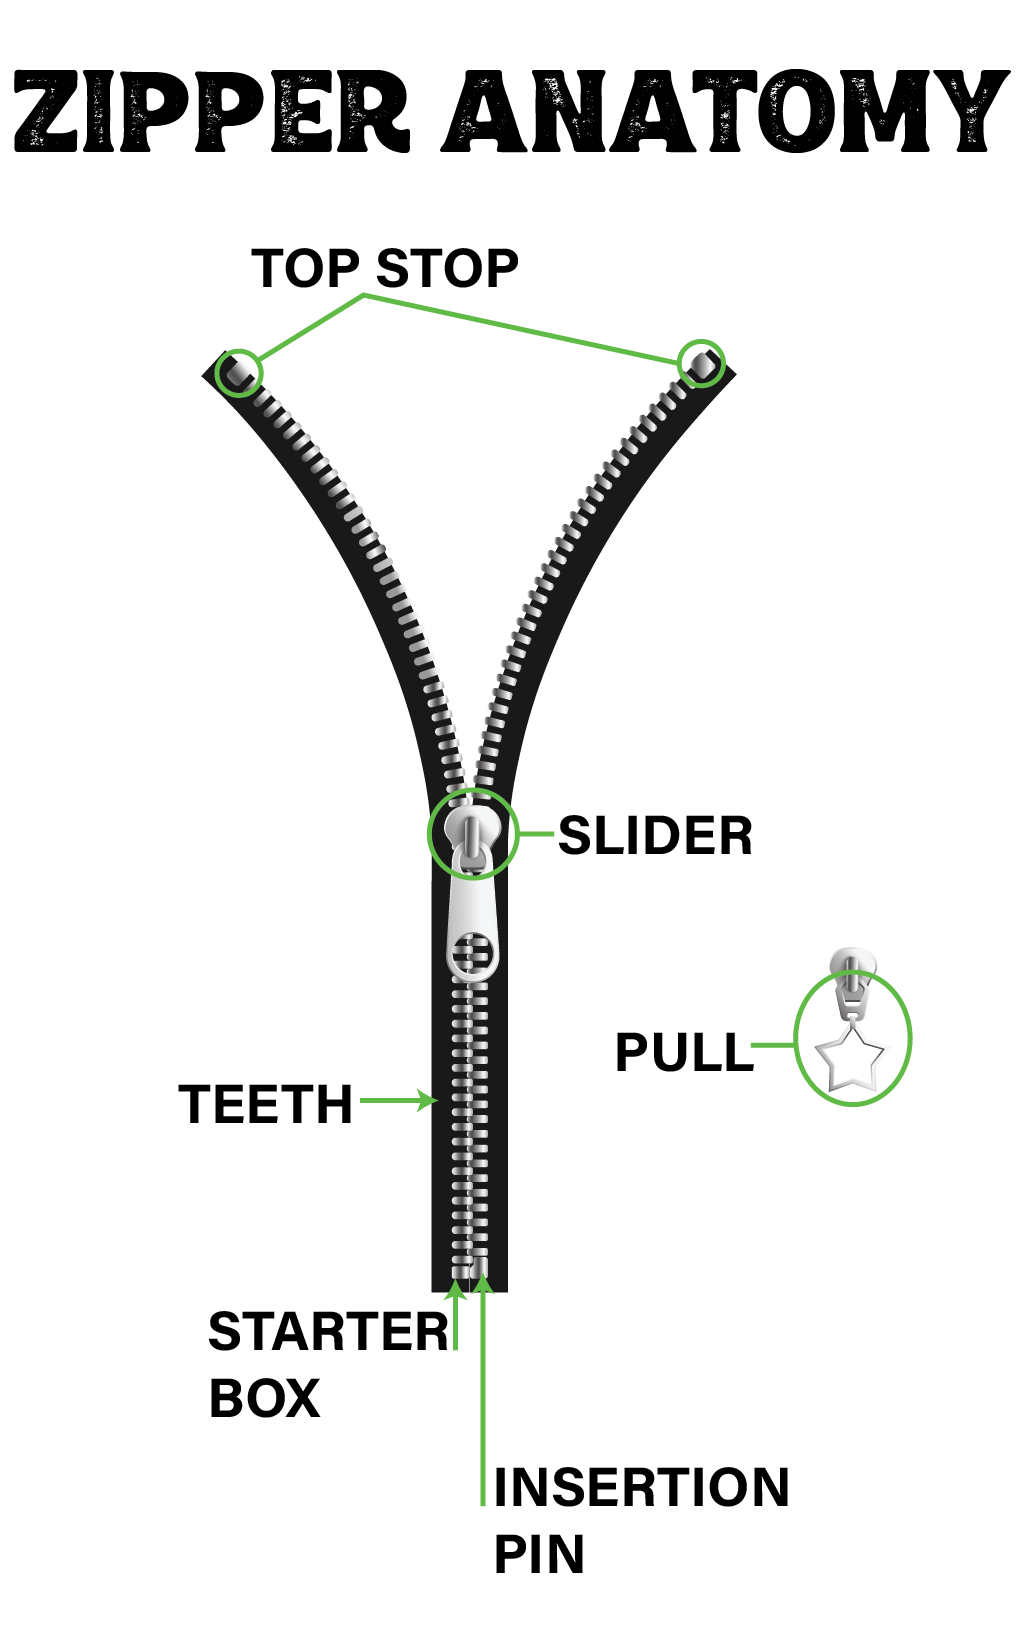 Anatomy of a Zipper and Zipper Sewing Tips, Blog